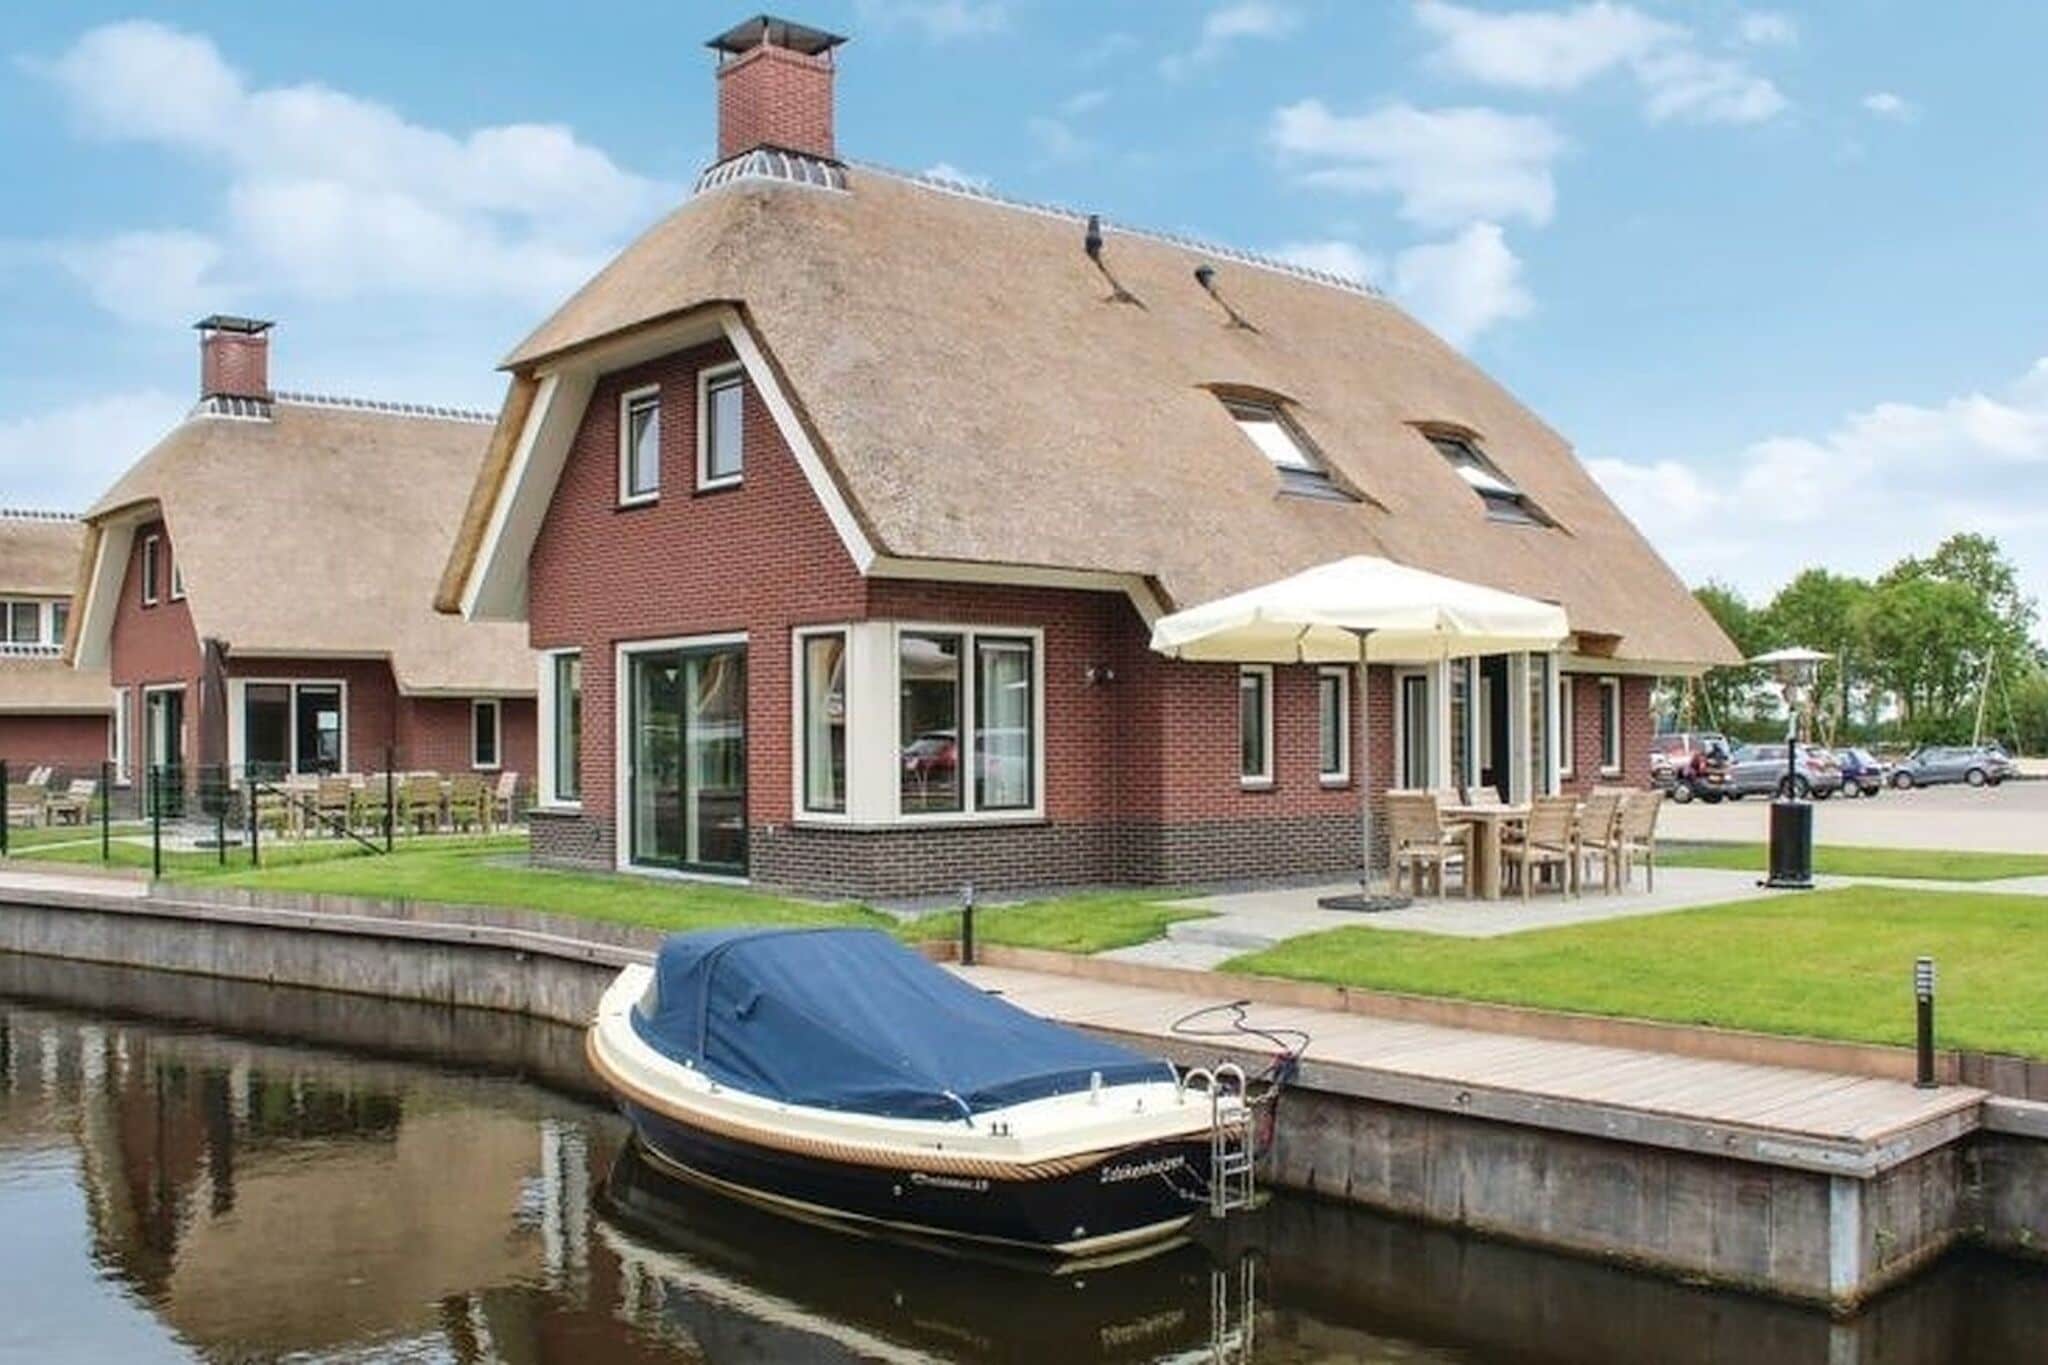 Villa with sauna, on a holiday park on the water